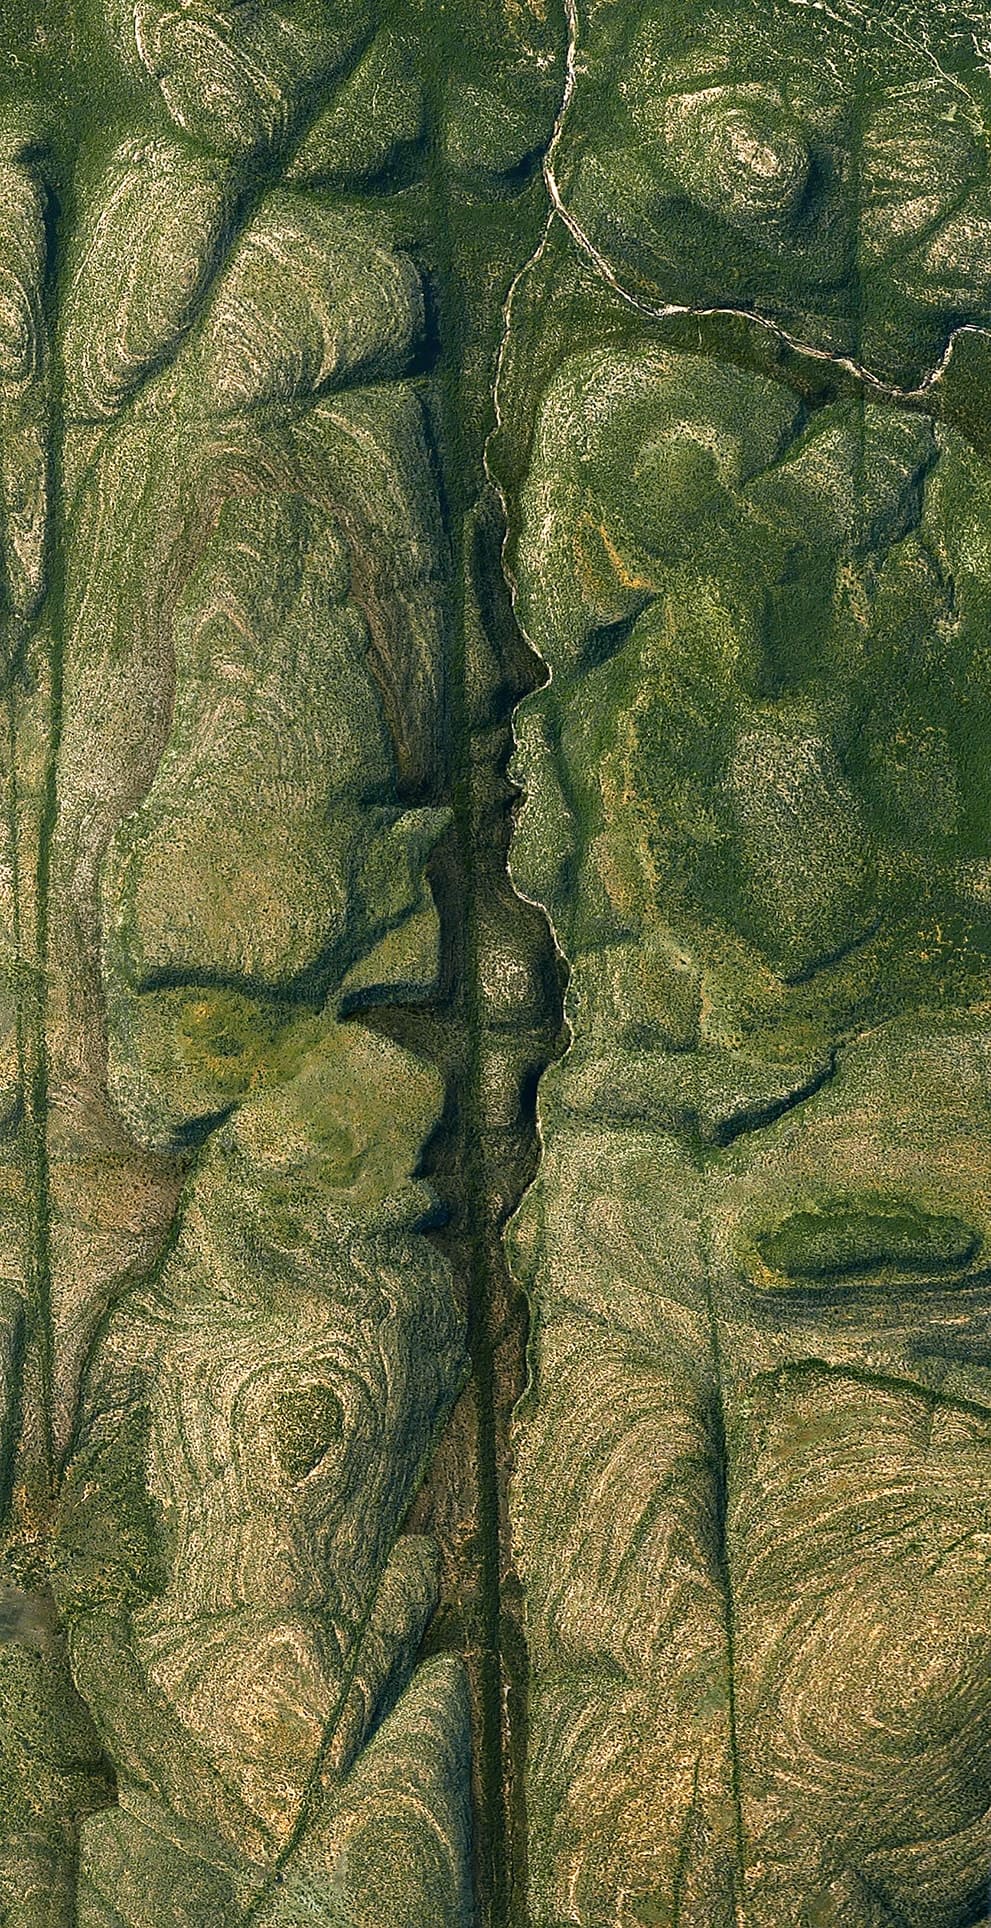 EARTH PORTRAIT 18 SOUTH AFRICA, 2015, CM 70×36, edition of 9